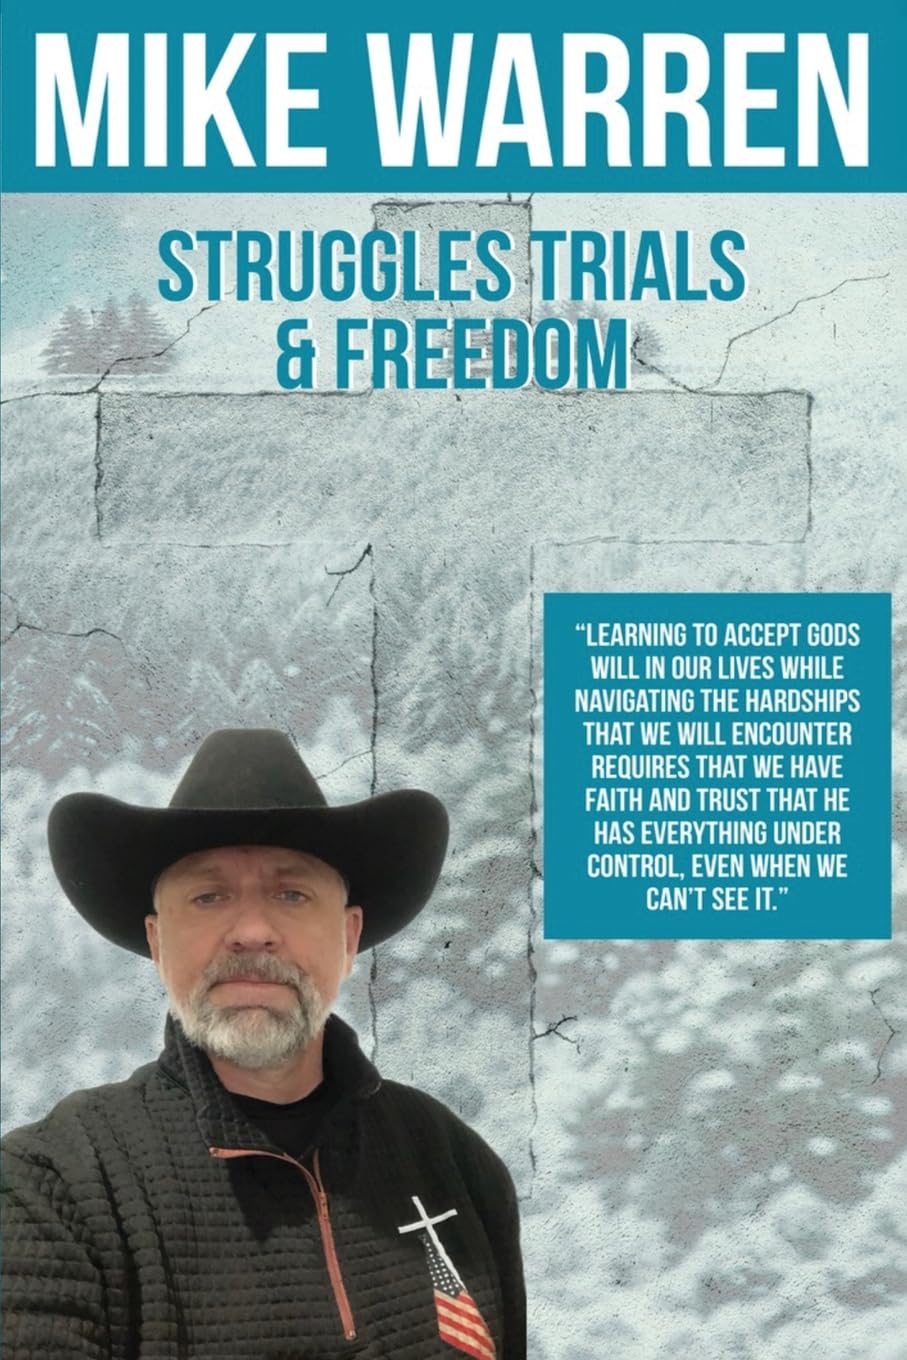 Introducing "Struggles, Trials, and Freedom" by Mike Warren: A Compelling Journey of Overcoming Adversity and Finding Strength